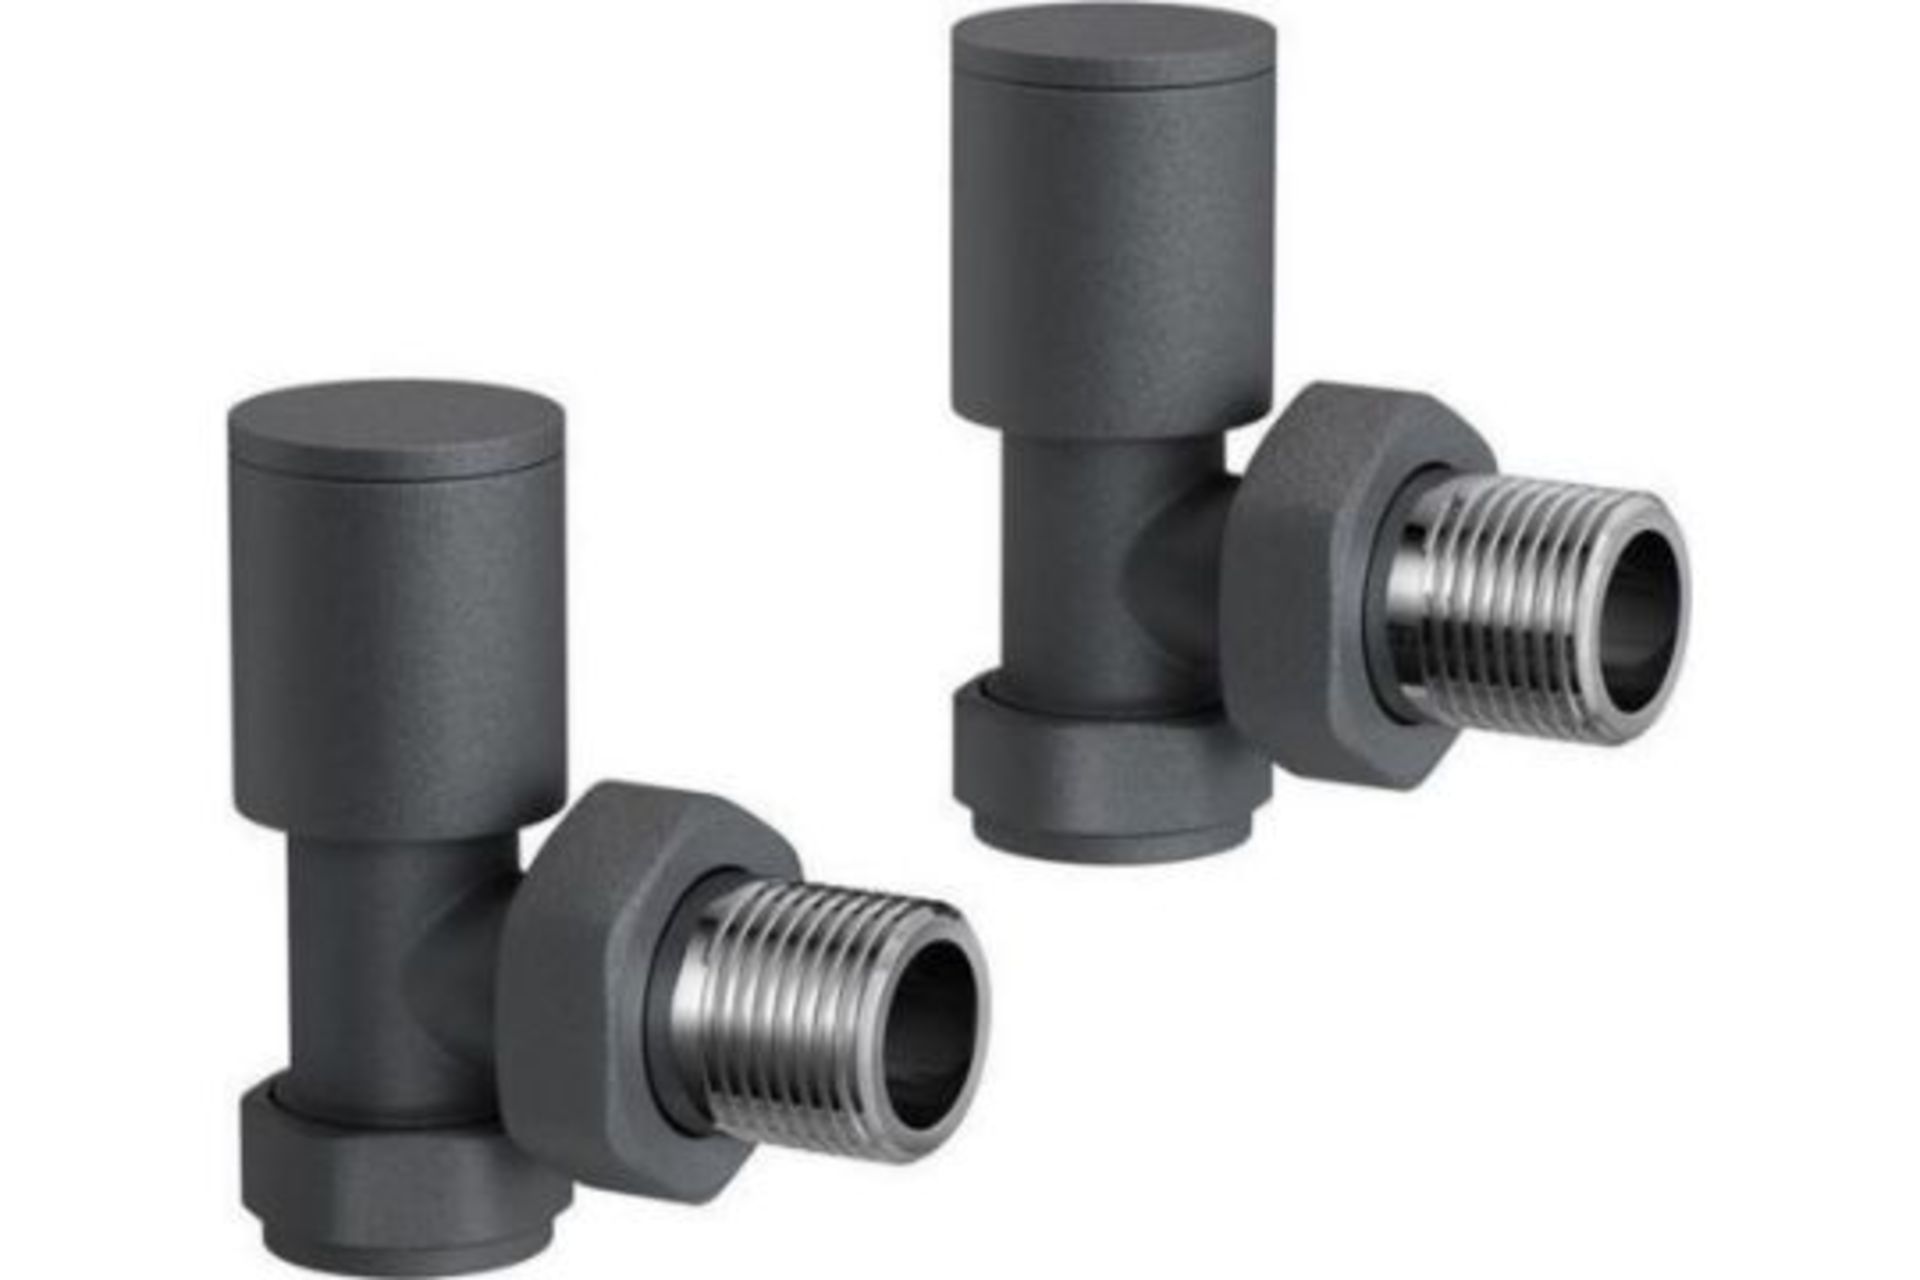 15mm Standard Connection Square Angled Anthracite Radiator Valves.Ra03A. Complies With BS 2767...